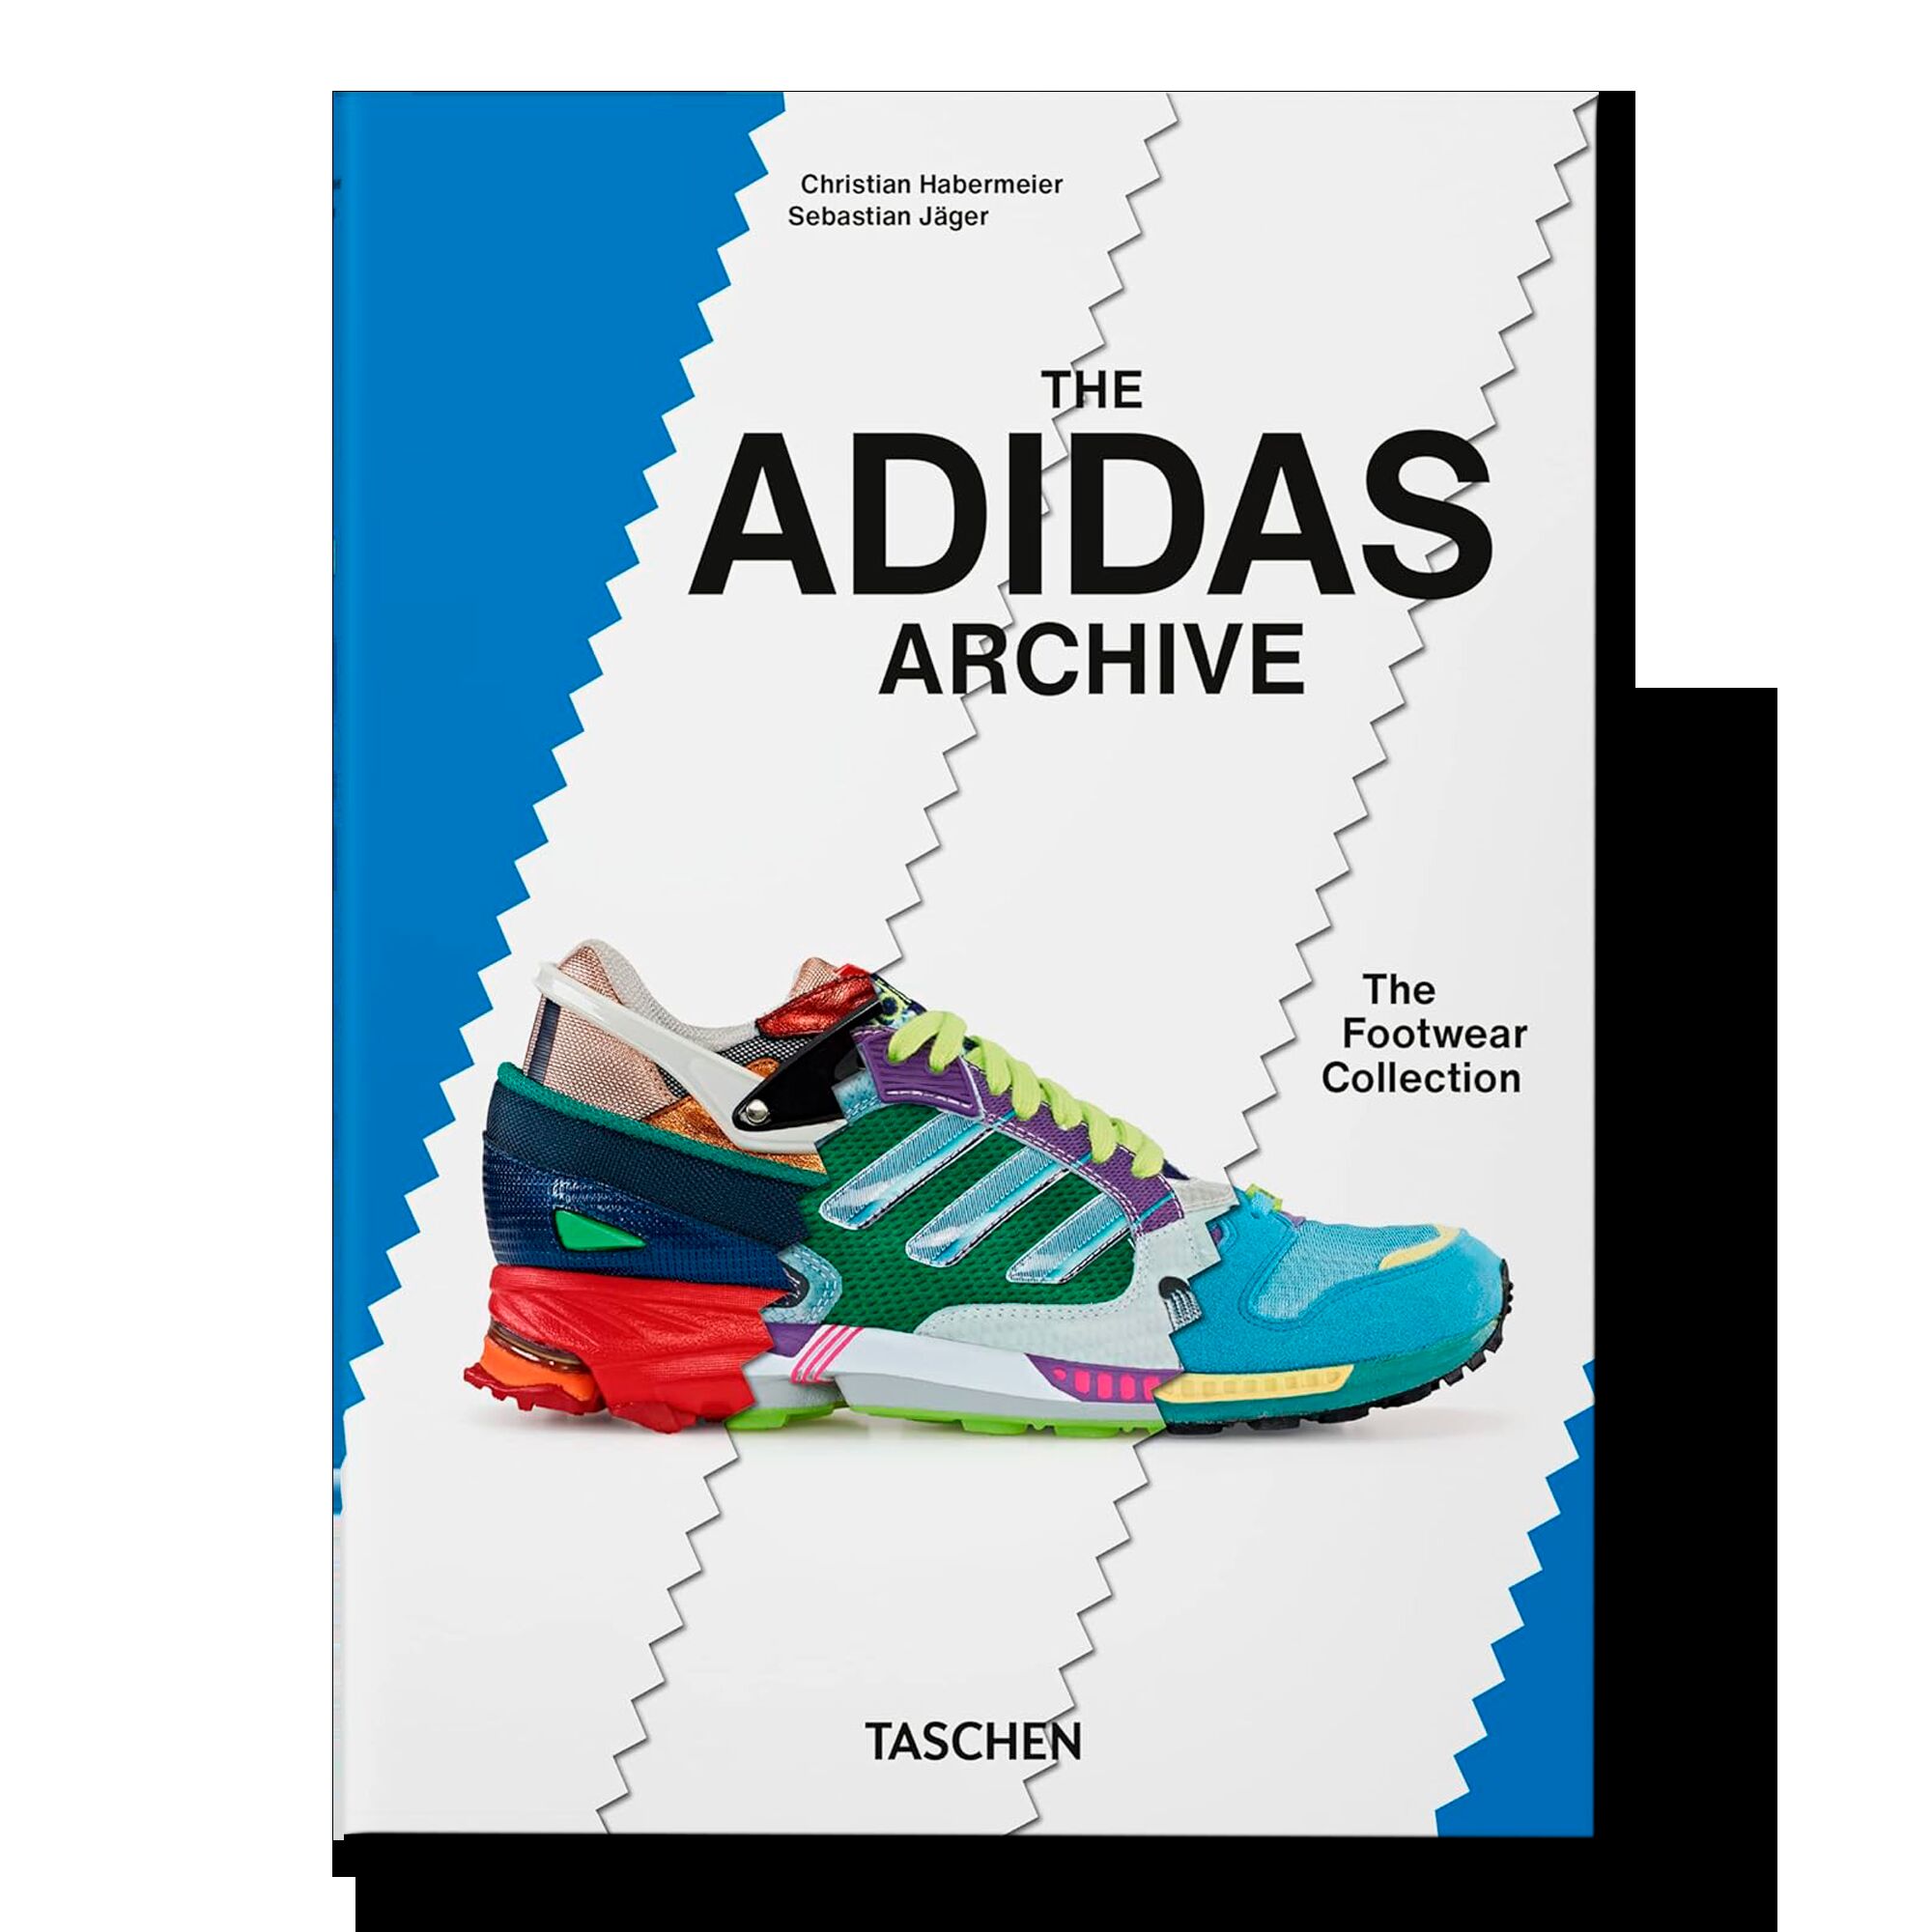 The Adidas Archive. The Footwear Collection (40th Anniversary Edition)